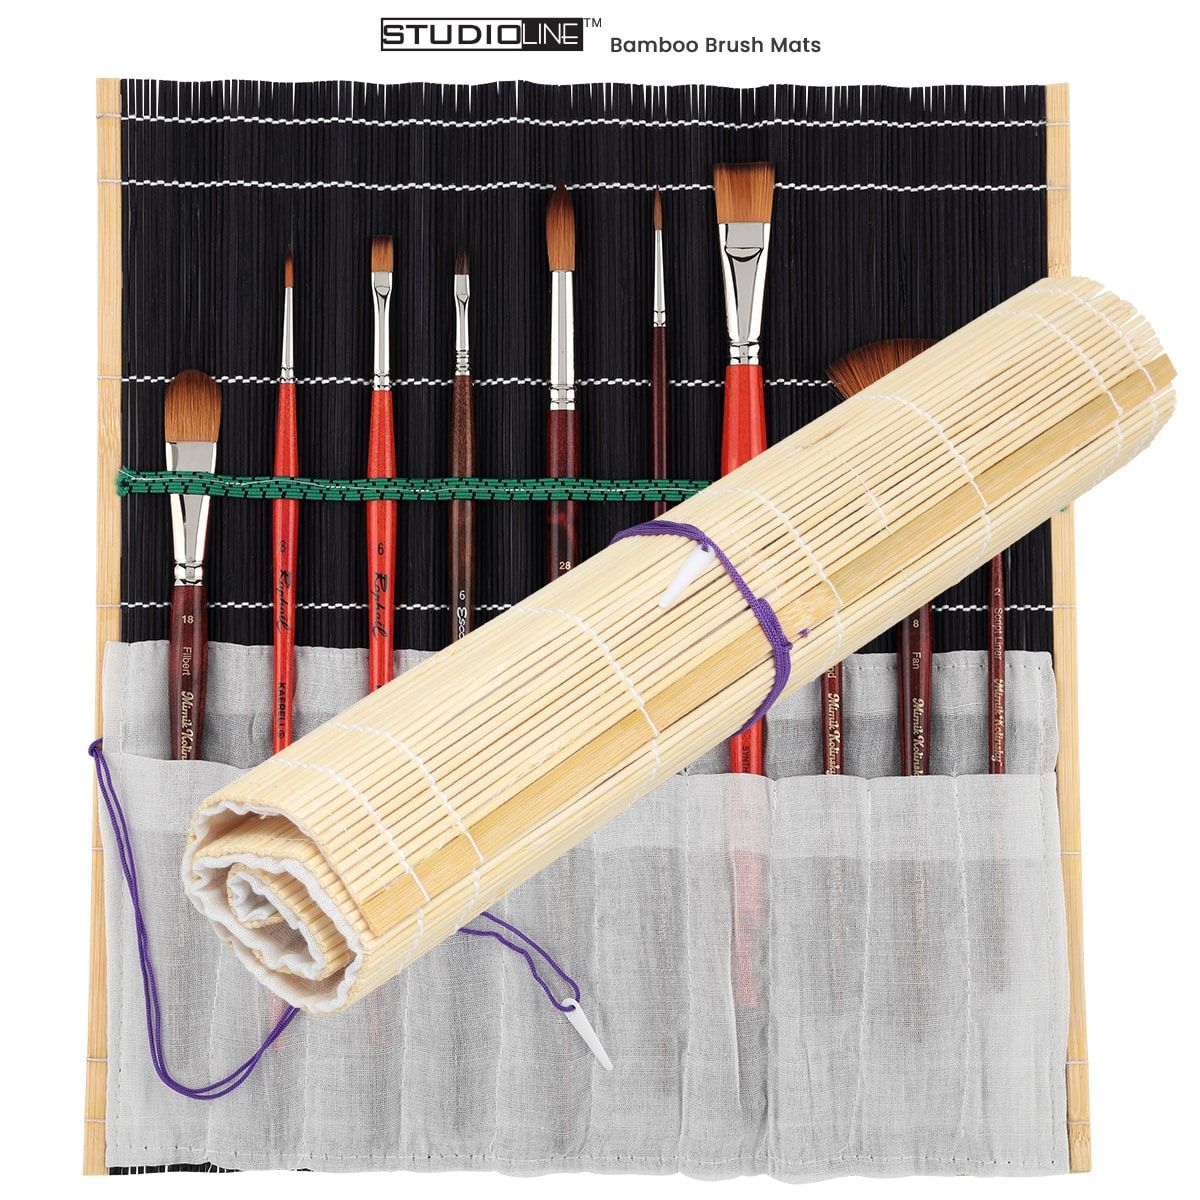 Dropship Bamboo Sushi Rolling Mat Set ( 2 Sets) to Sell Online at